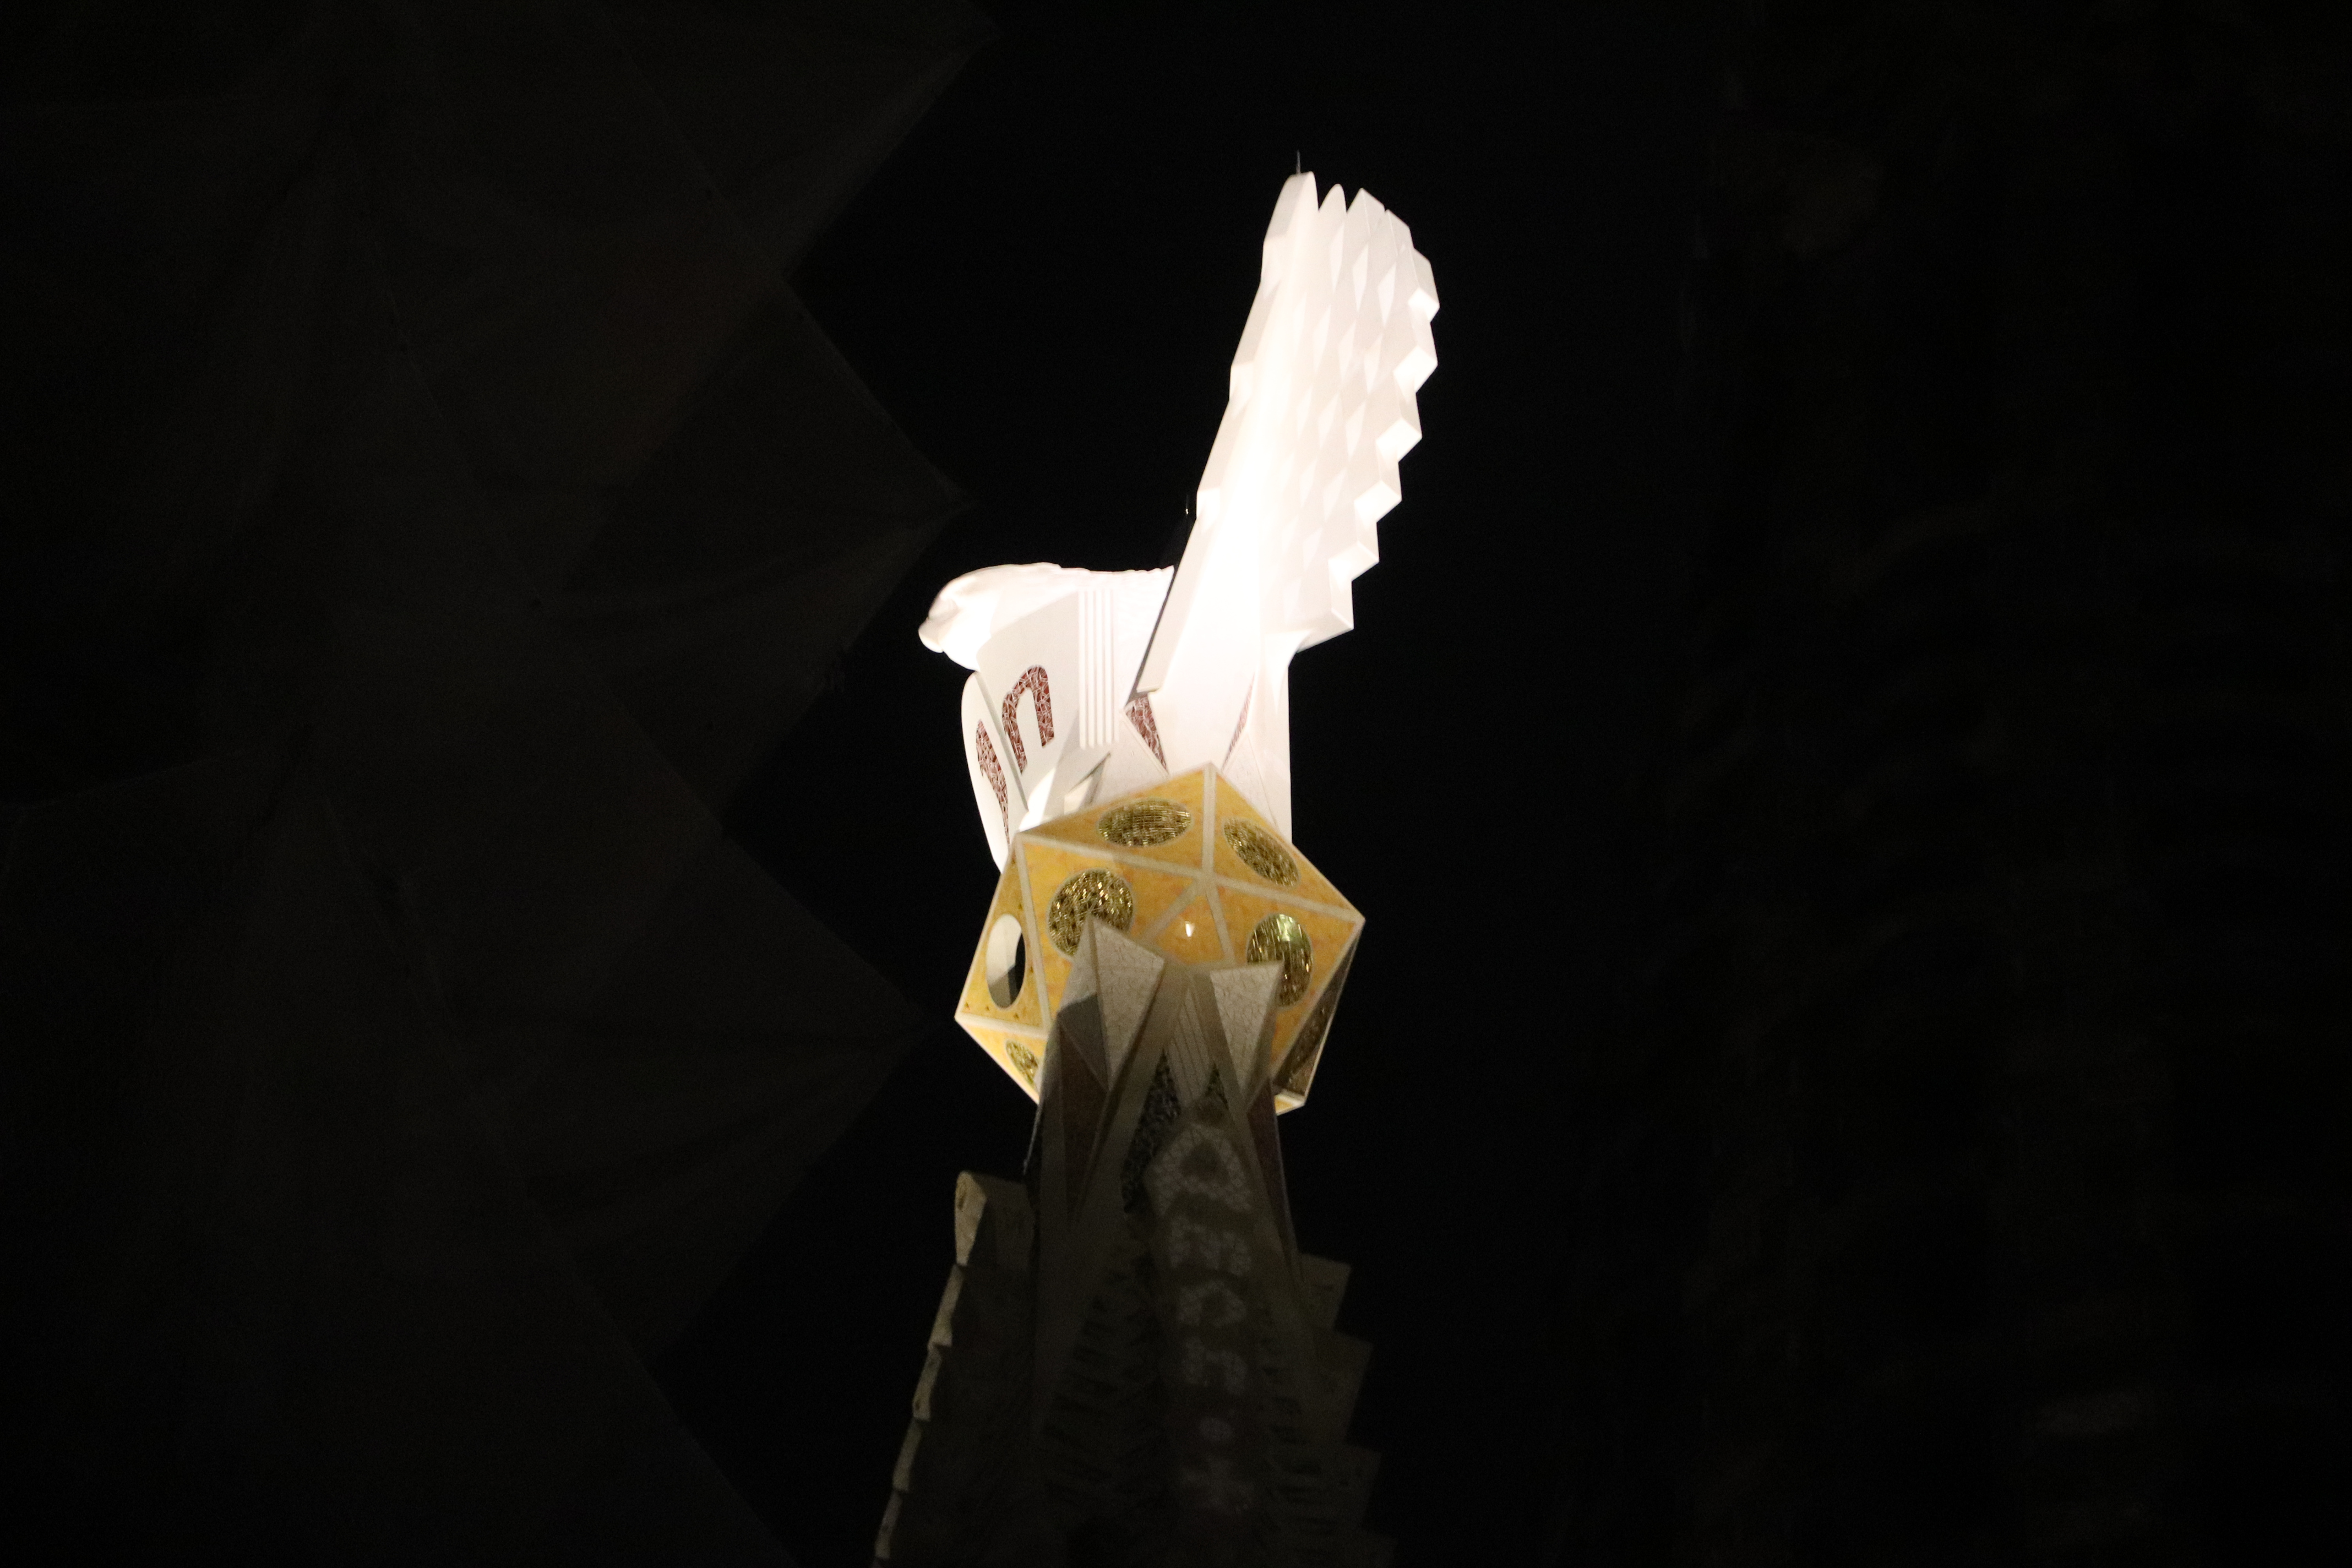 The Eagle of Saint John on top of the Evangelist tower lit up